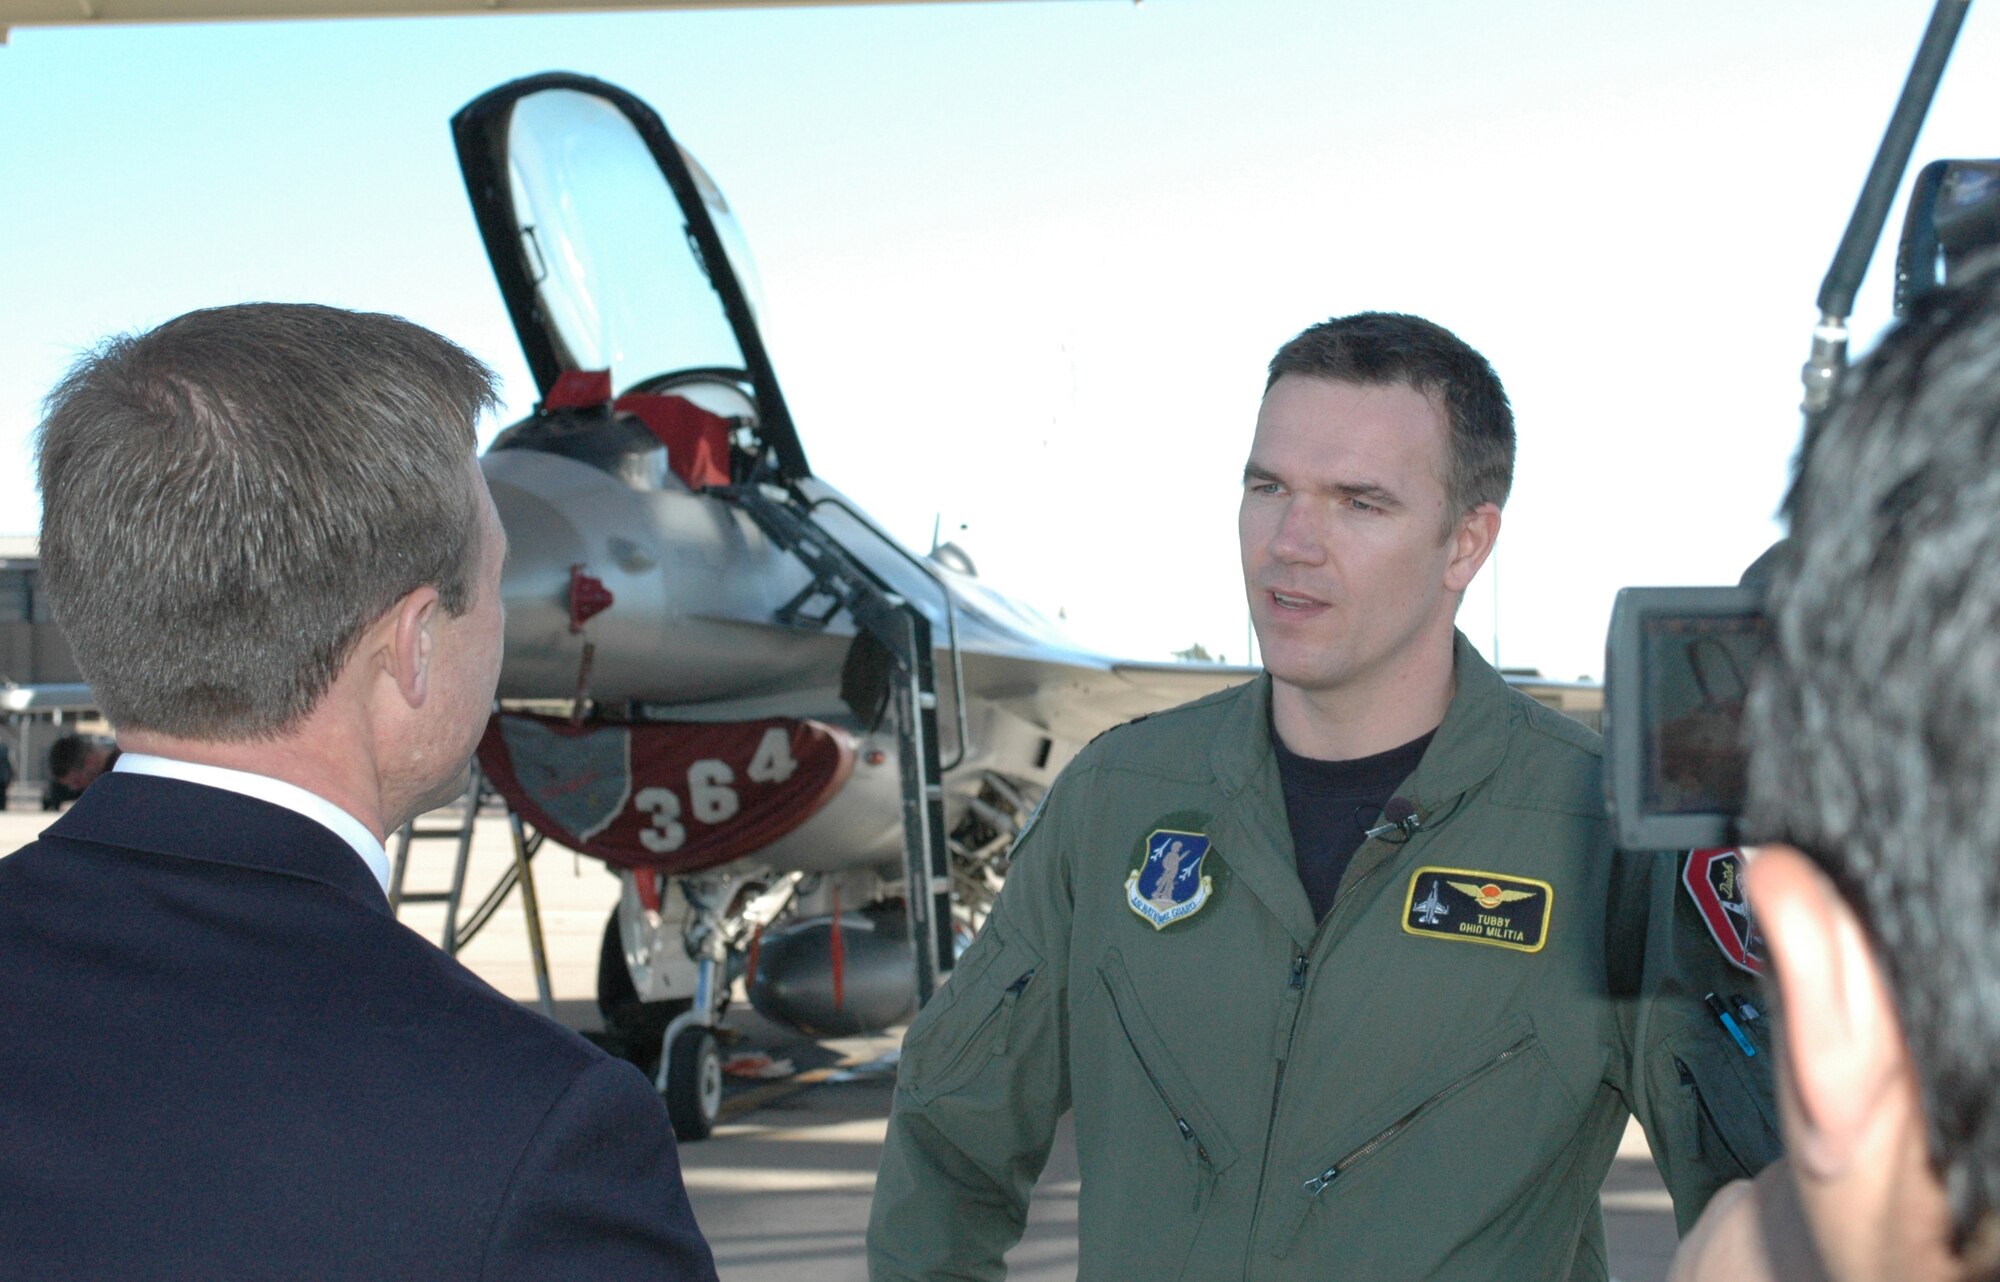 Maj. Olde Bijvank, a Royal Netherlands Air Force F-16 pilot, interviewes on the Operation Snowbird ramp at Davis-Monthan Air Force Base with KOLD, Channel 13, reporter J.D. Wallace about flying in Southern Arizona, Jan. 14. Major Bijvank, an instructor pilot with the Ohio Air National Guard, trained at the 162nd Fighter Wing at Tucson International Airport as a student pilot 12 years ago. He noted that the weather, ranges and the support of the Arizona Guard amount to ideal pilot training conditions here. The Dutch will train at Operation Snowbird Jan. 11-31 with Ohio’s 178th Fighter Wing to escape winter weather conditions in the north. (Air National Guard photo by Capt. Gabe Johnson)